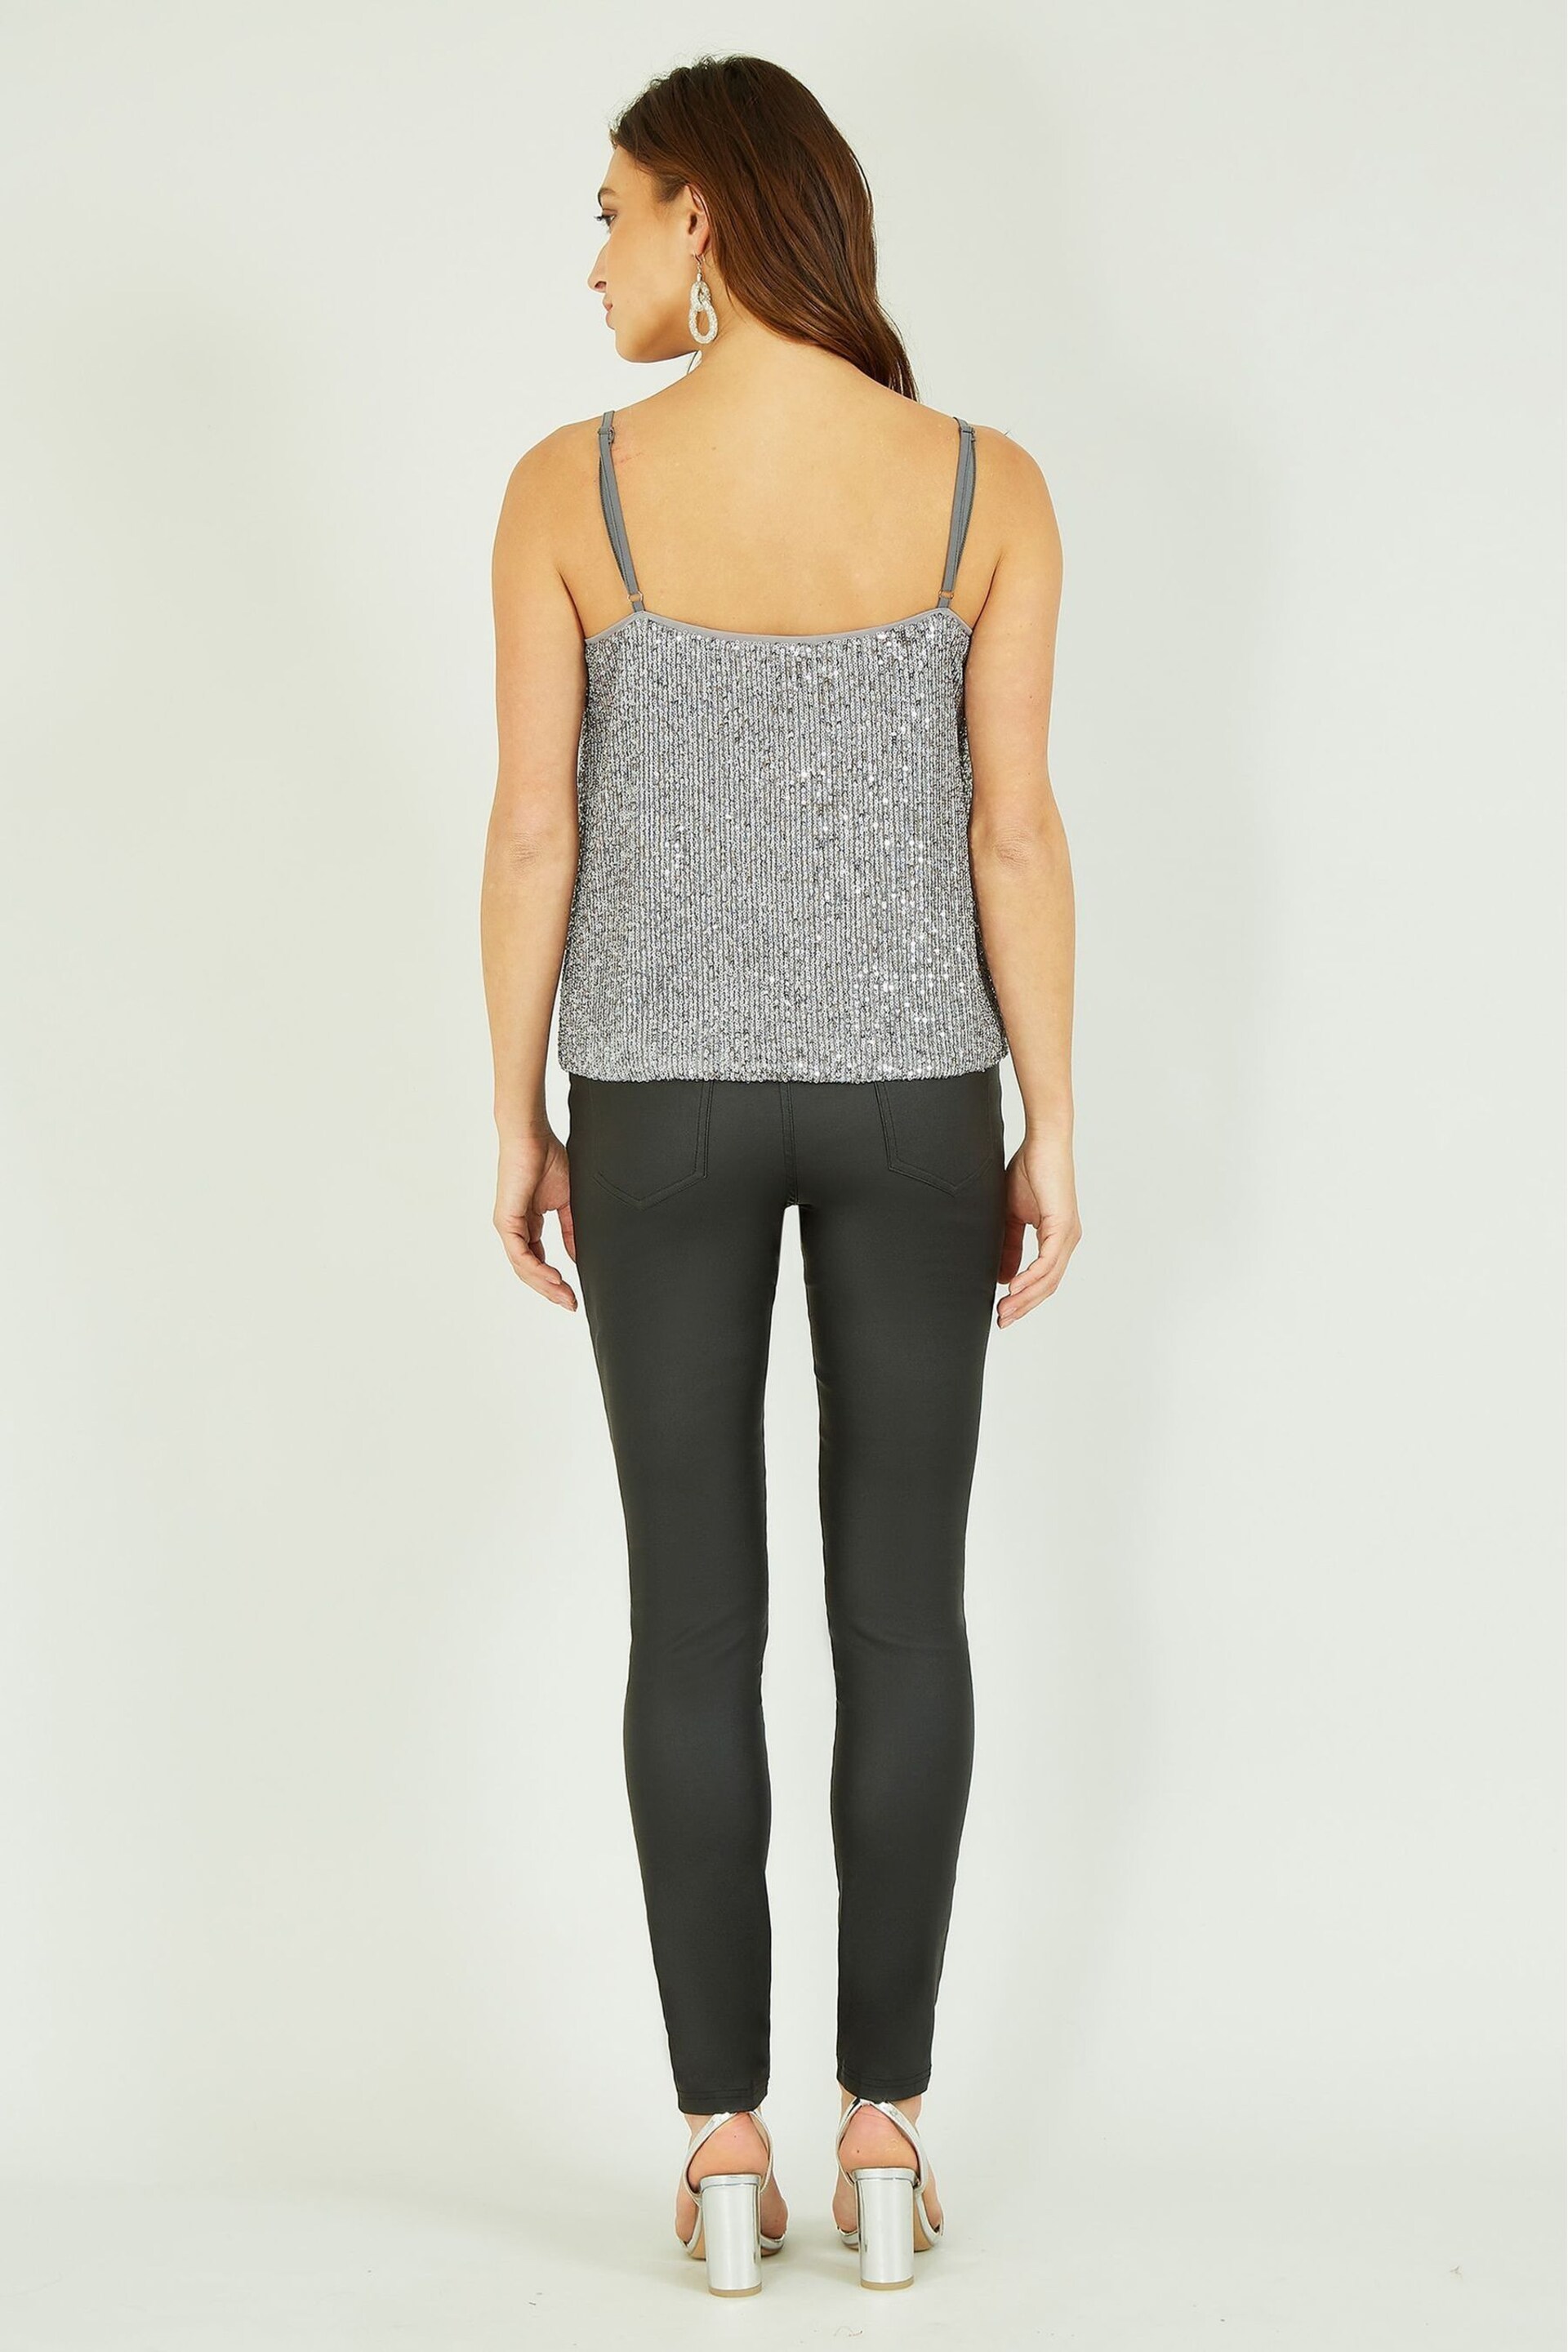 Yumi Silver Sequin Vest Top - Image 3 of 4